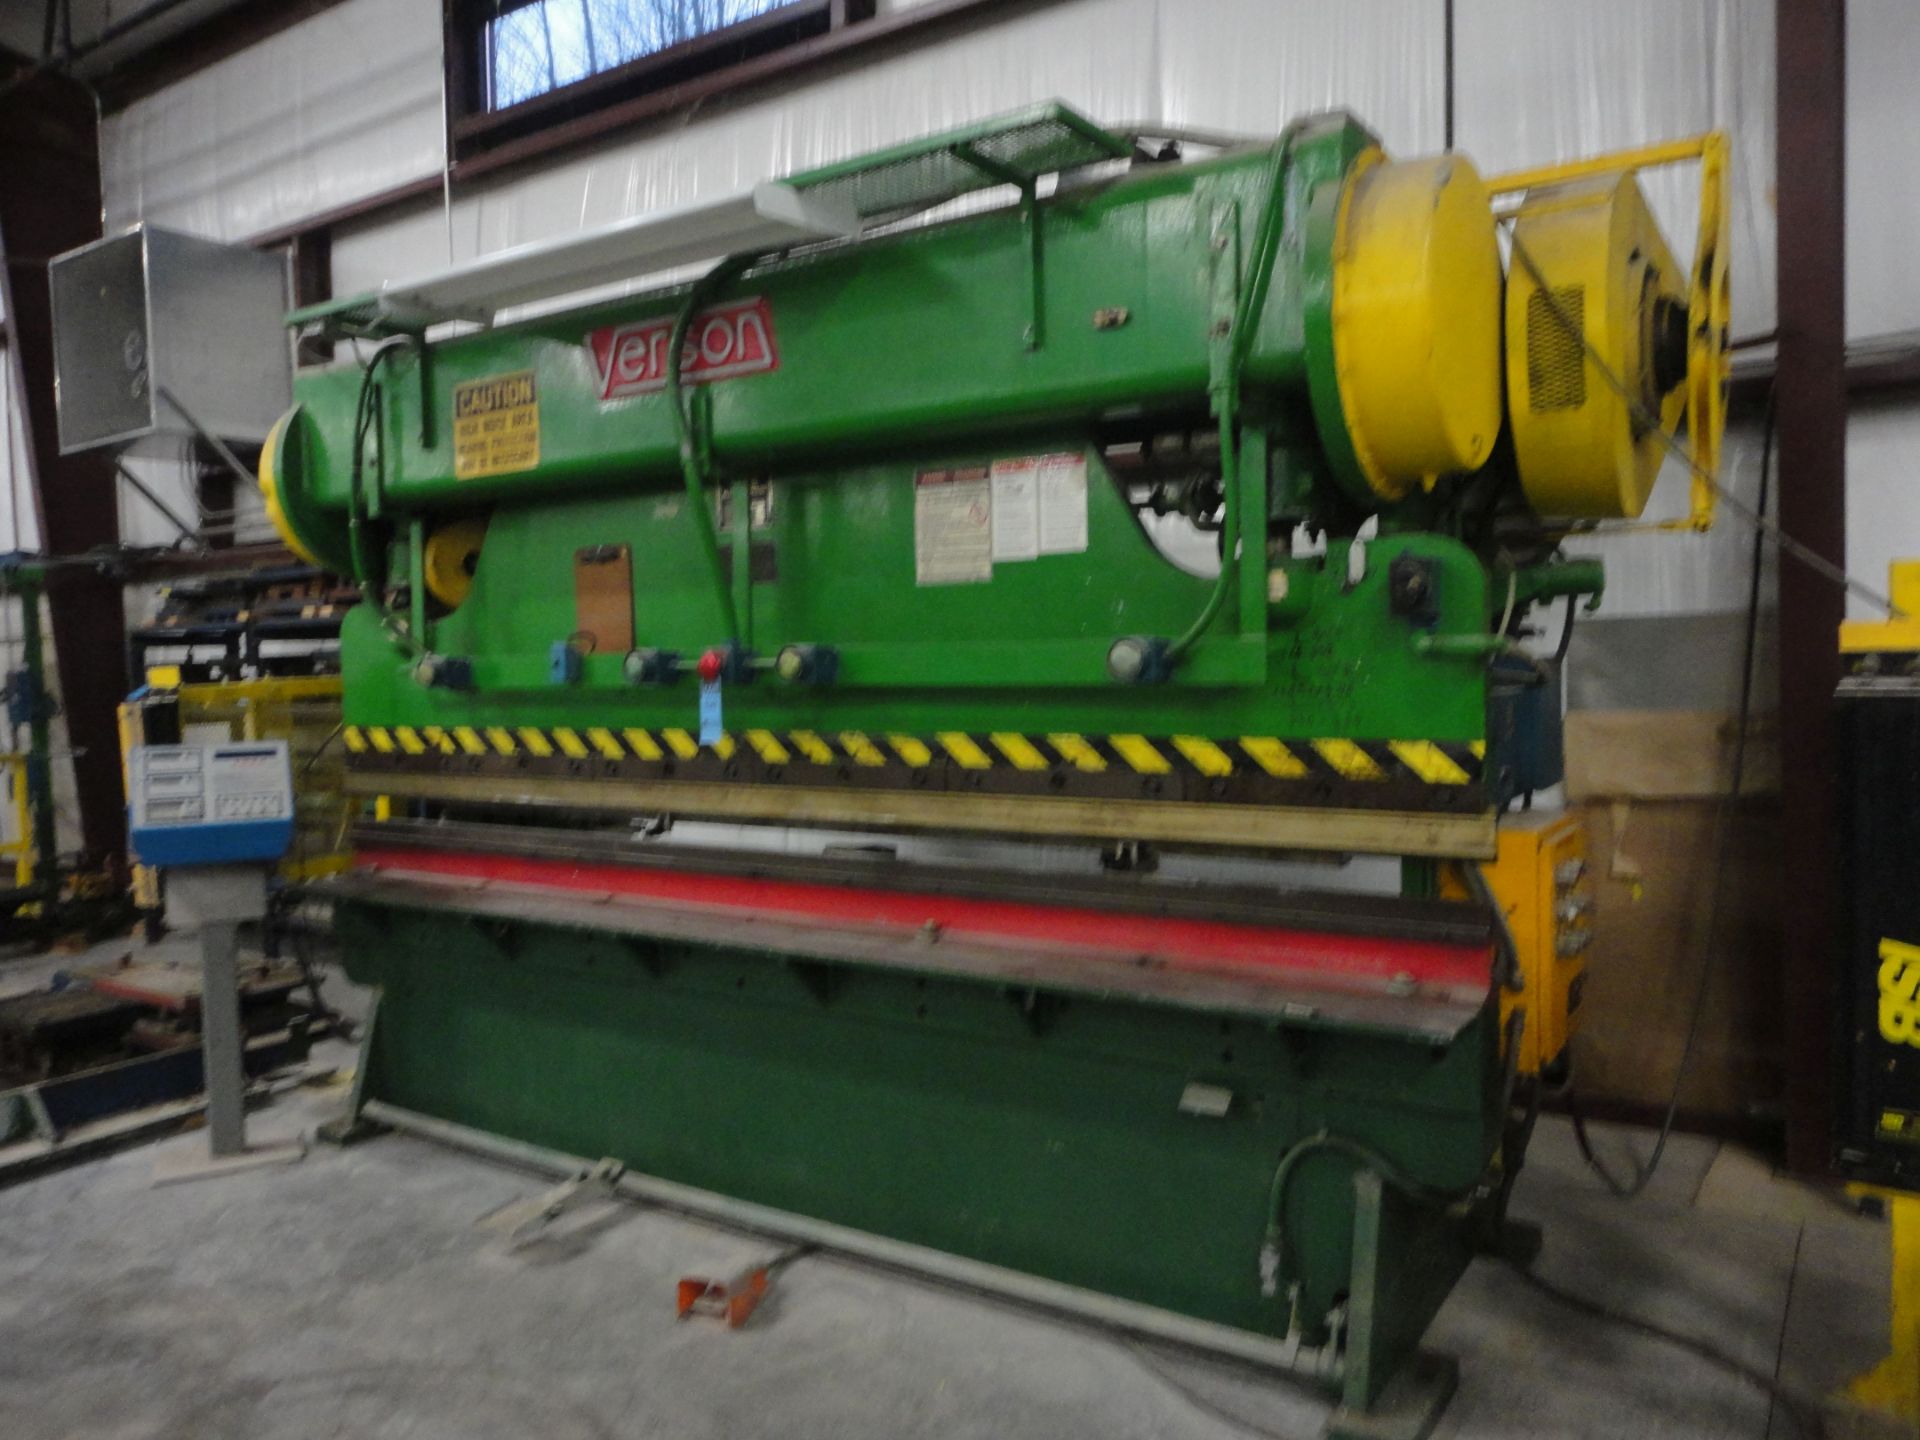 65 TON X 12' VERSON MECHANICAL PRESS BRAKE; S/N 1440-2010-65, WITH CNC BACK GAGE - Image 2 of 19